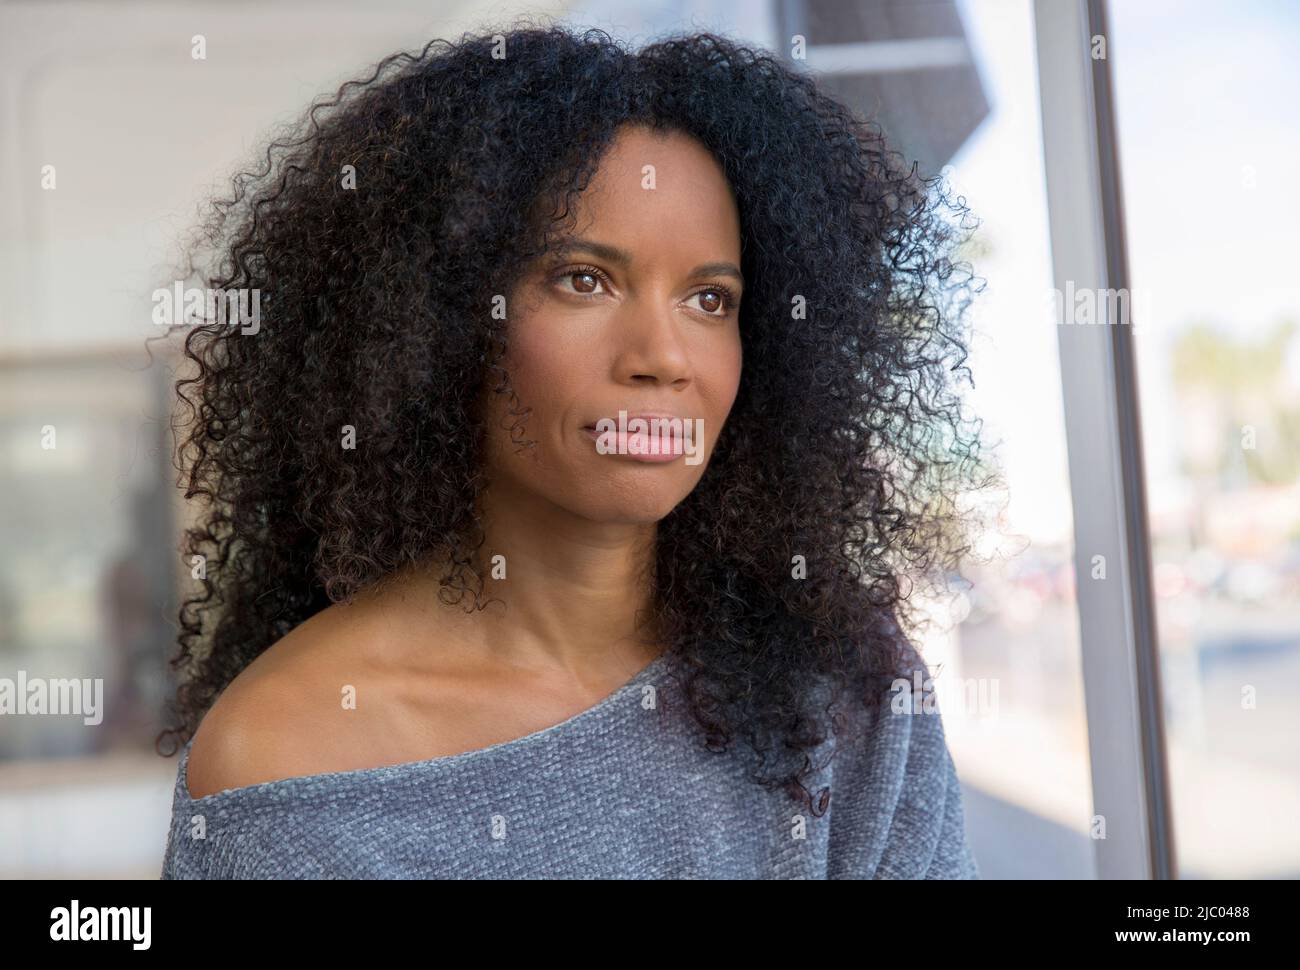 Mixed race, middle-aged woman with natural hair looking out window in brightly lit room. Stock Photo